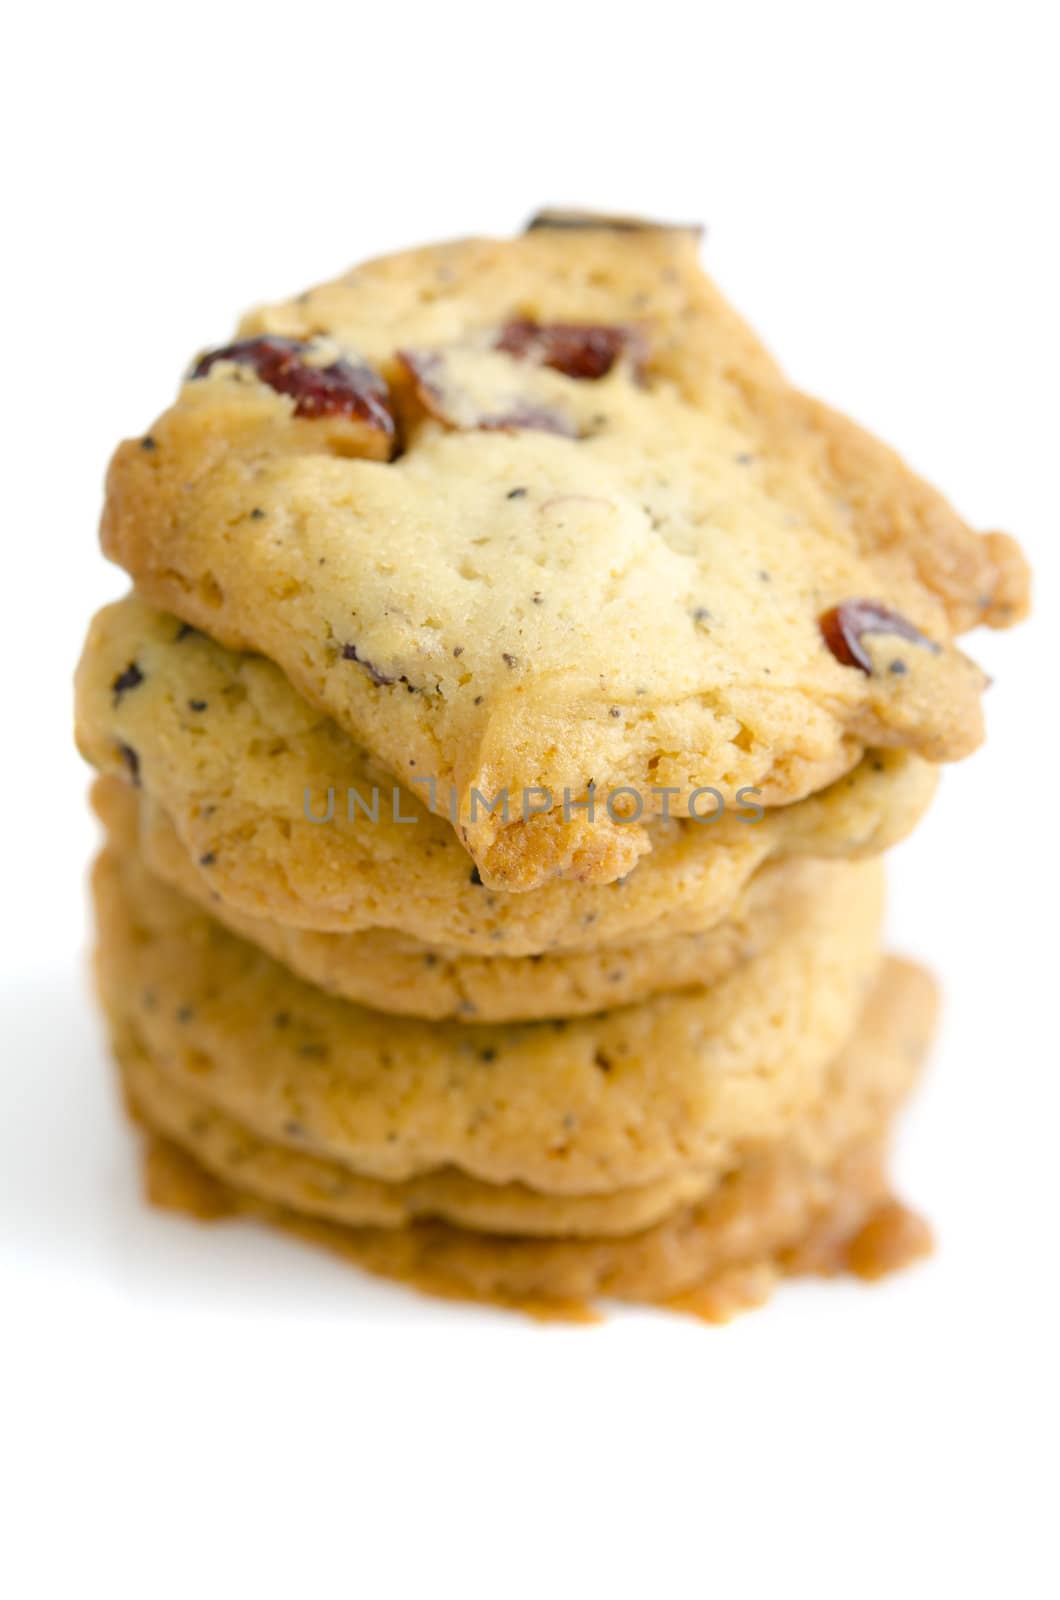 Fresh baked organic passion fruit cookies on white background